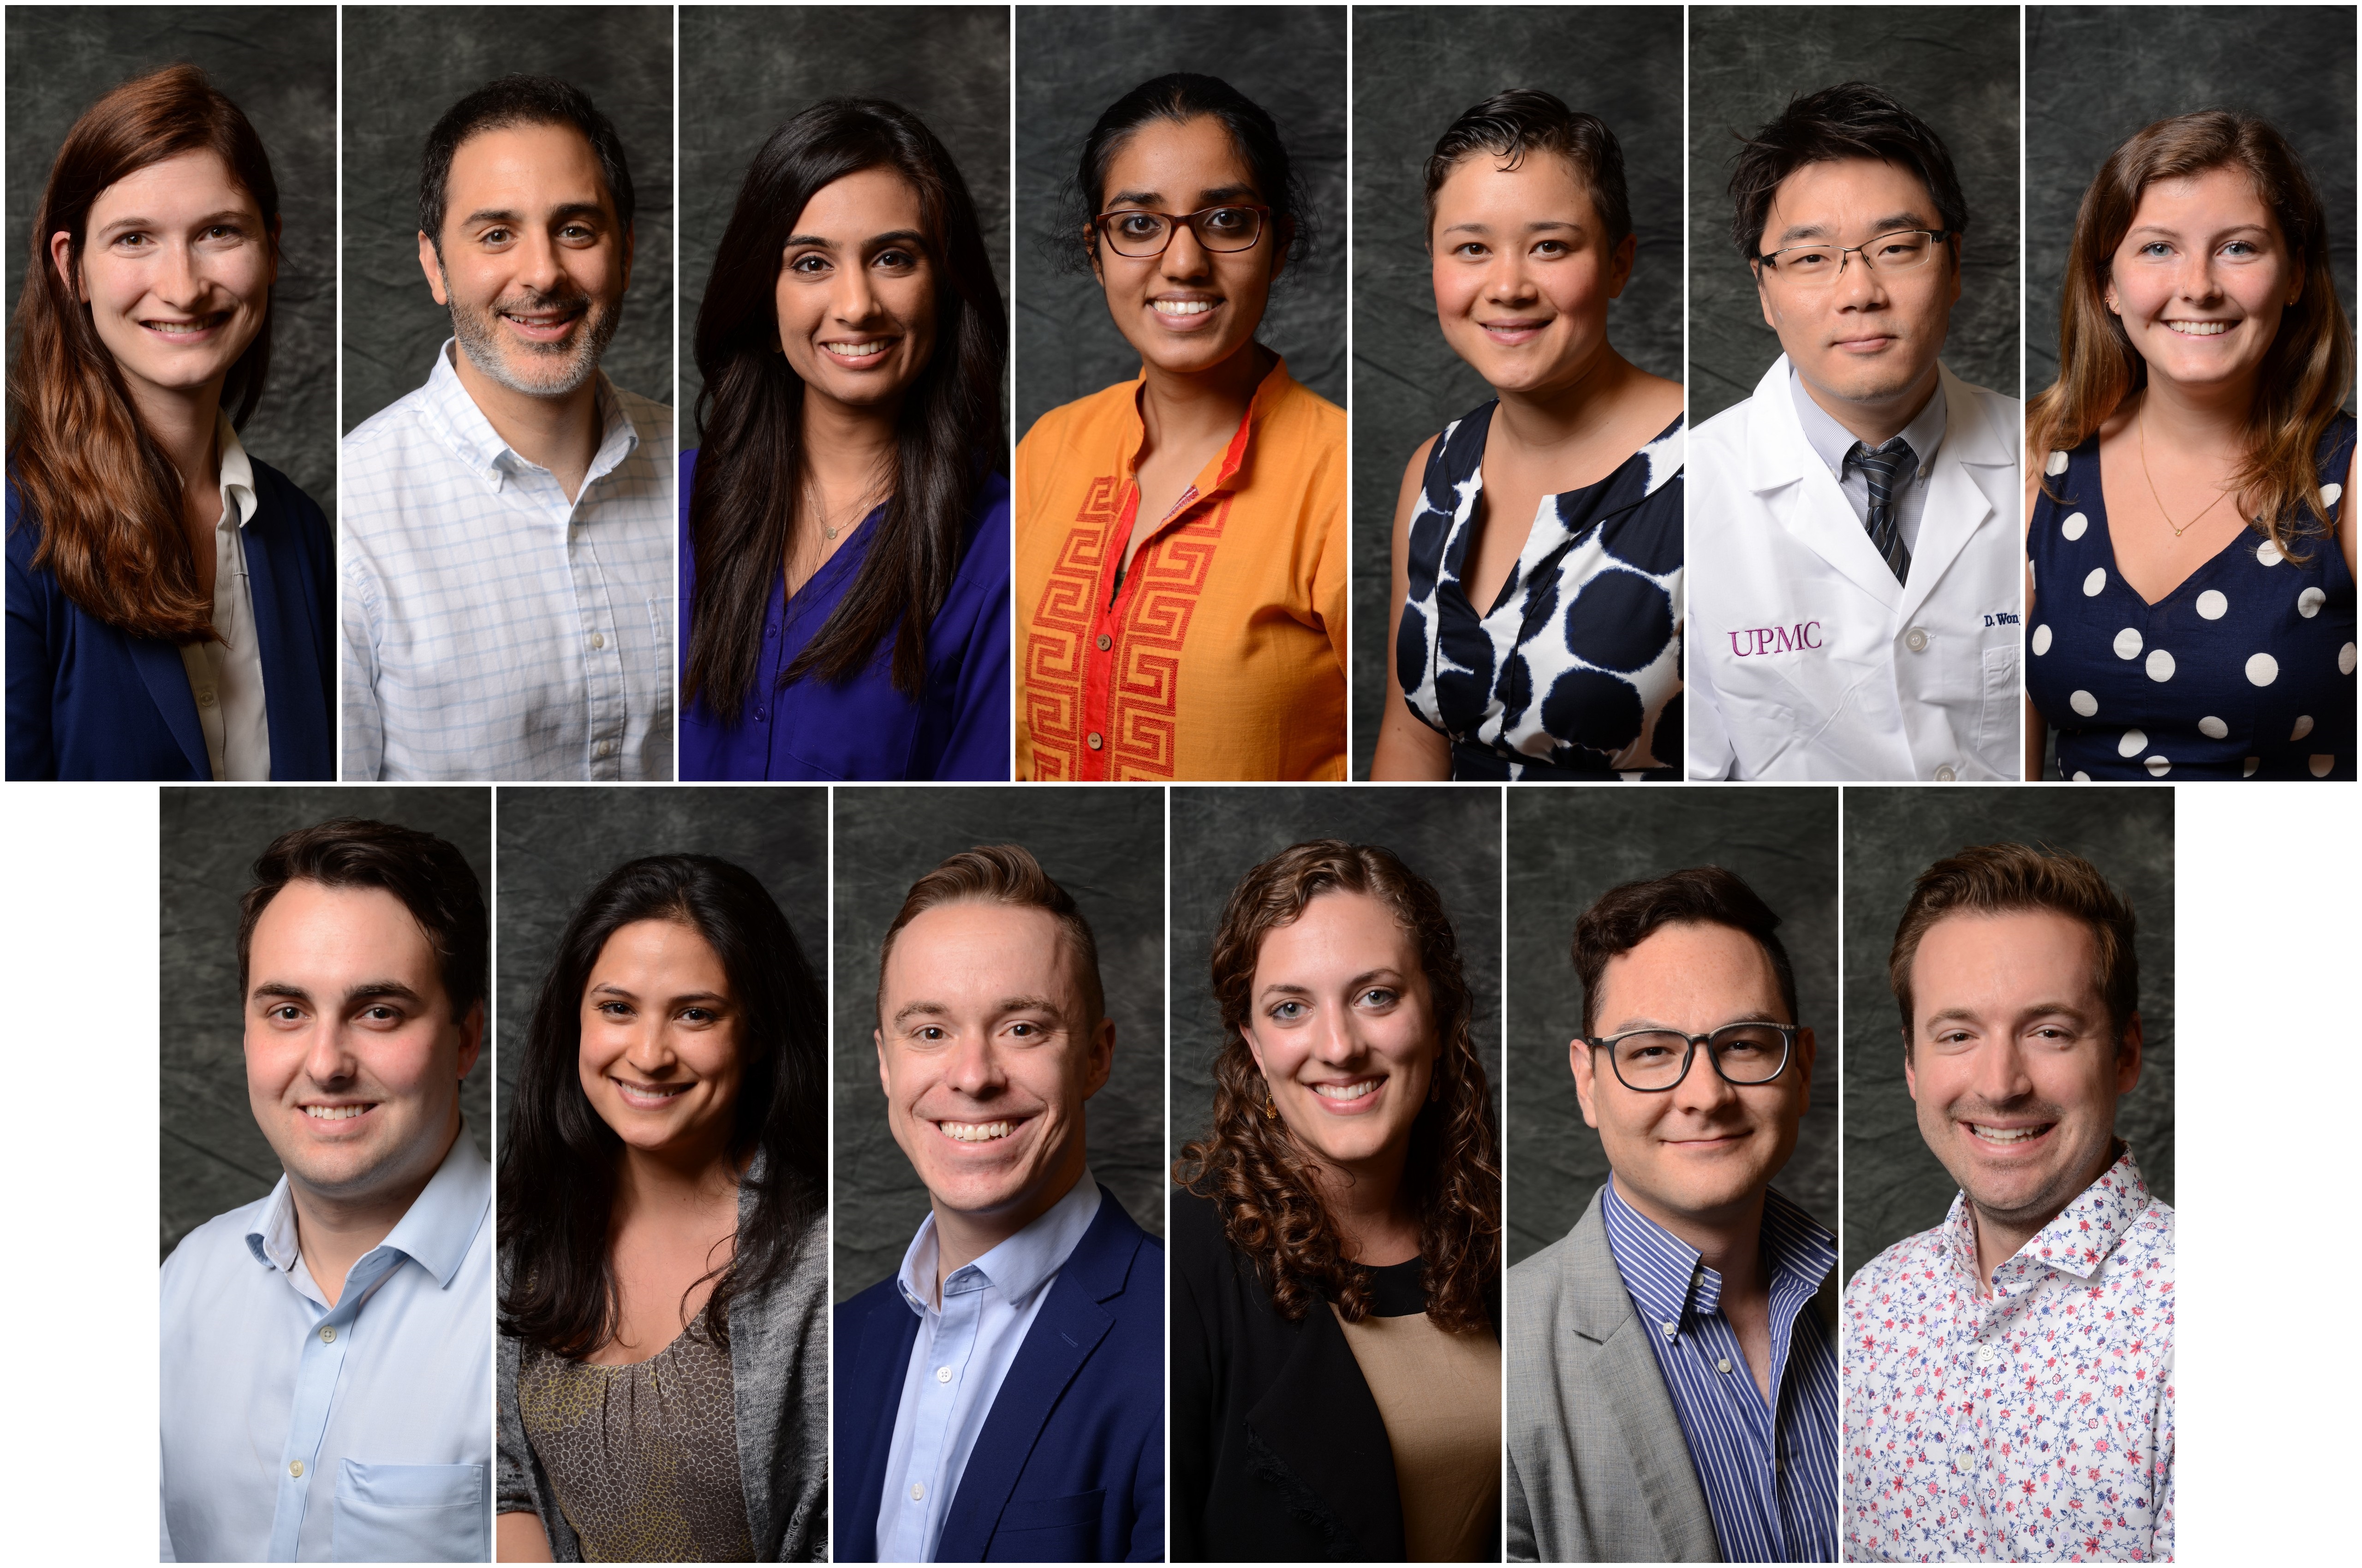 New 2018 Class of Psychiatry Residents